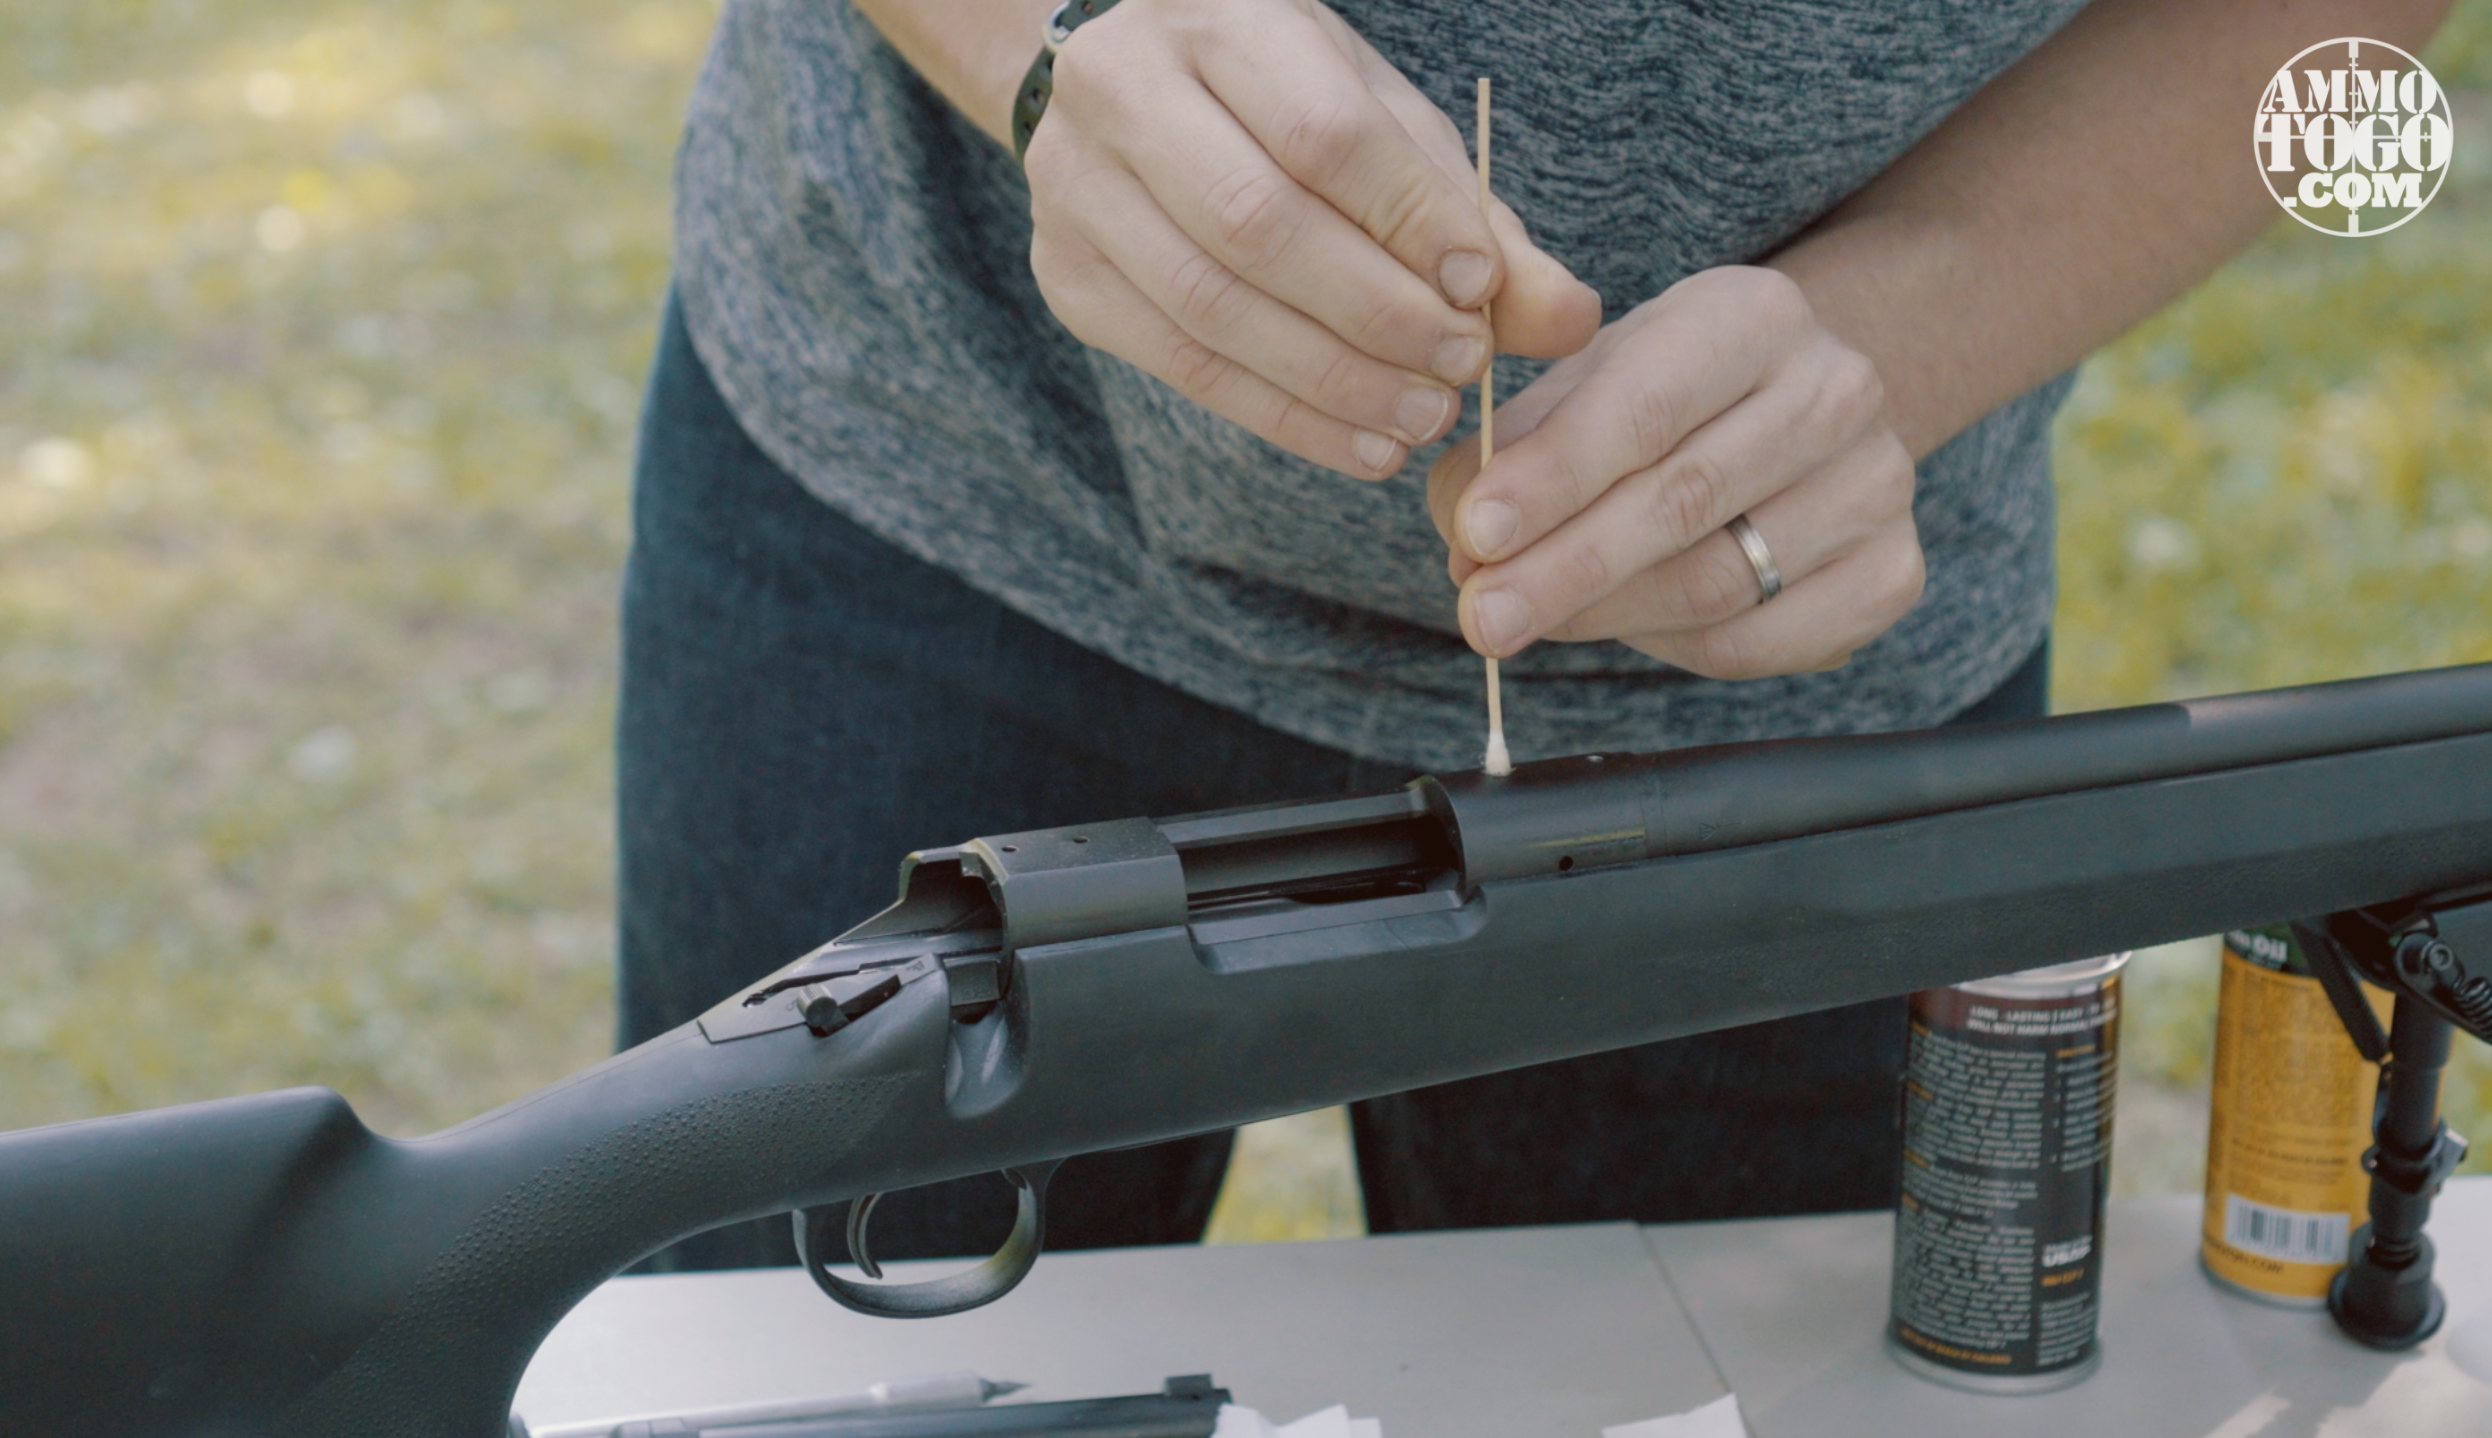 Removing Dirt and Grease From Rifle Receiver